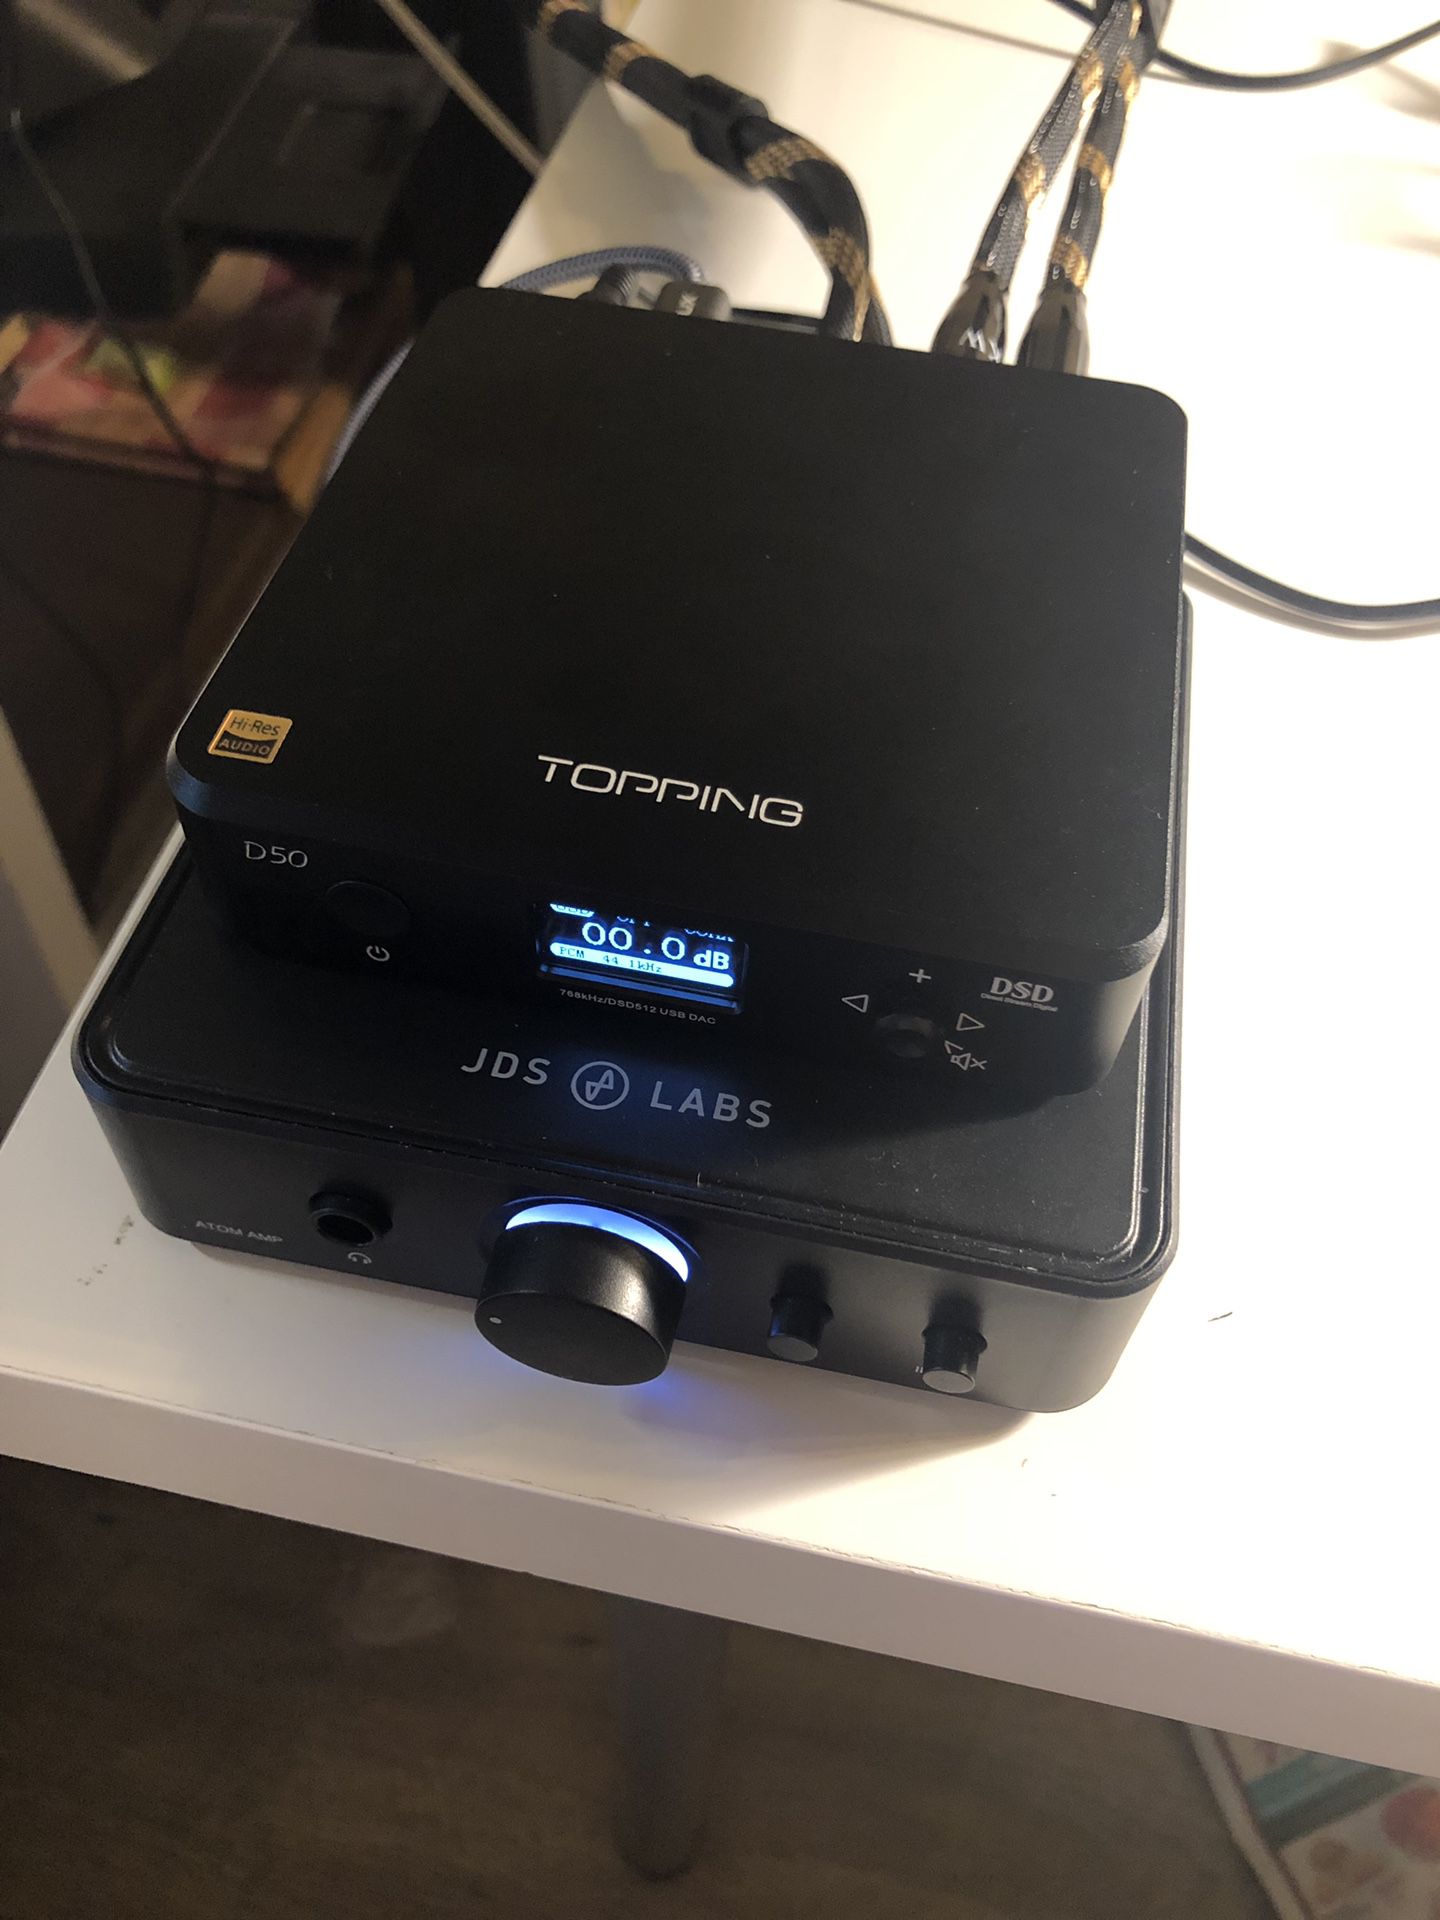 Topping D50 Dac plus JDS LAB ATOM amp plus RCA cable for Diego, CA - OfferUp